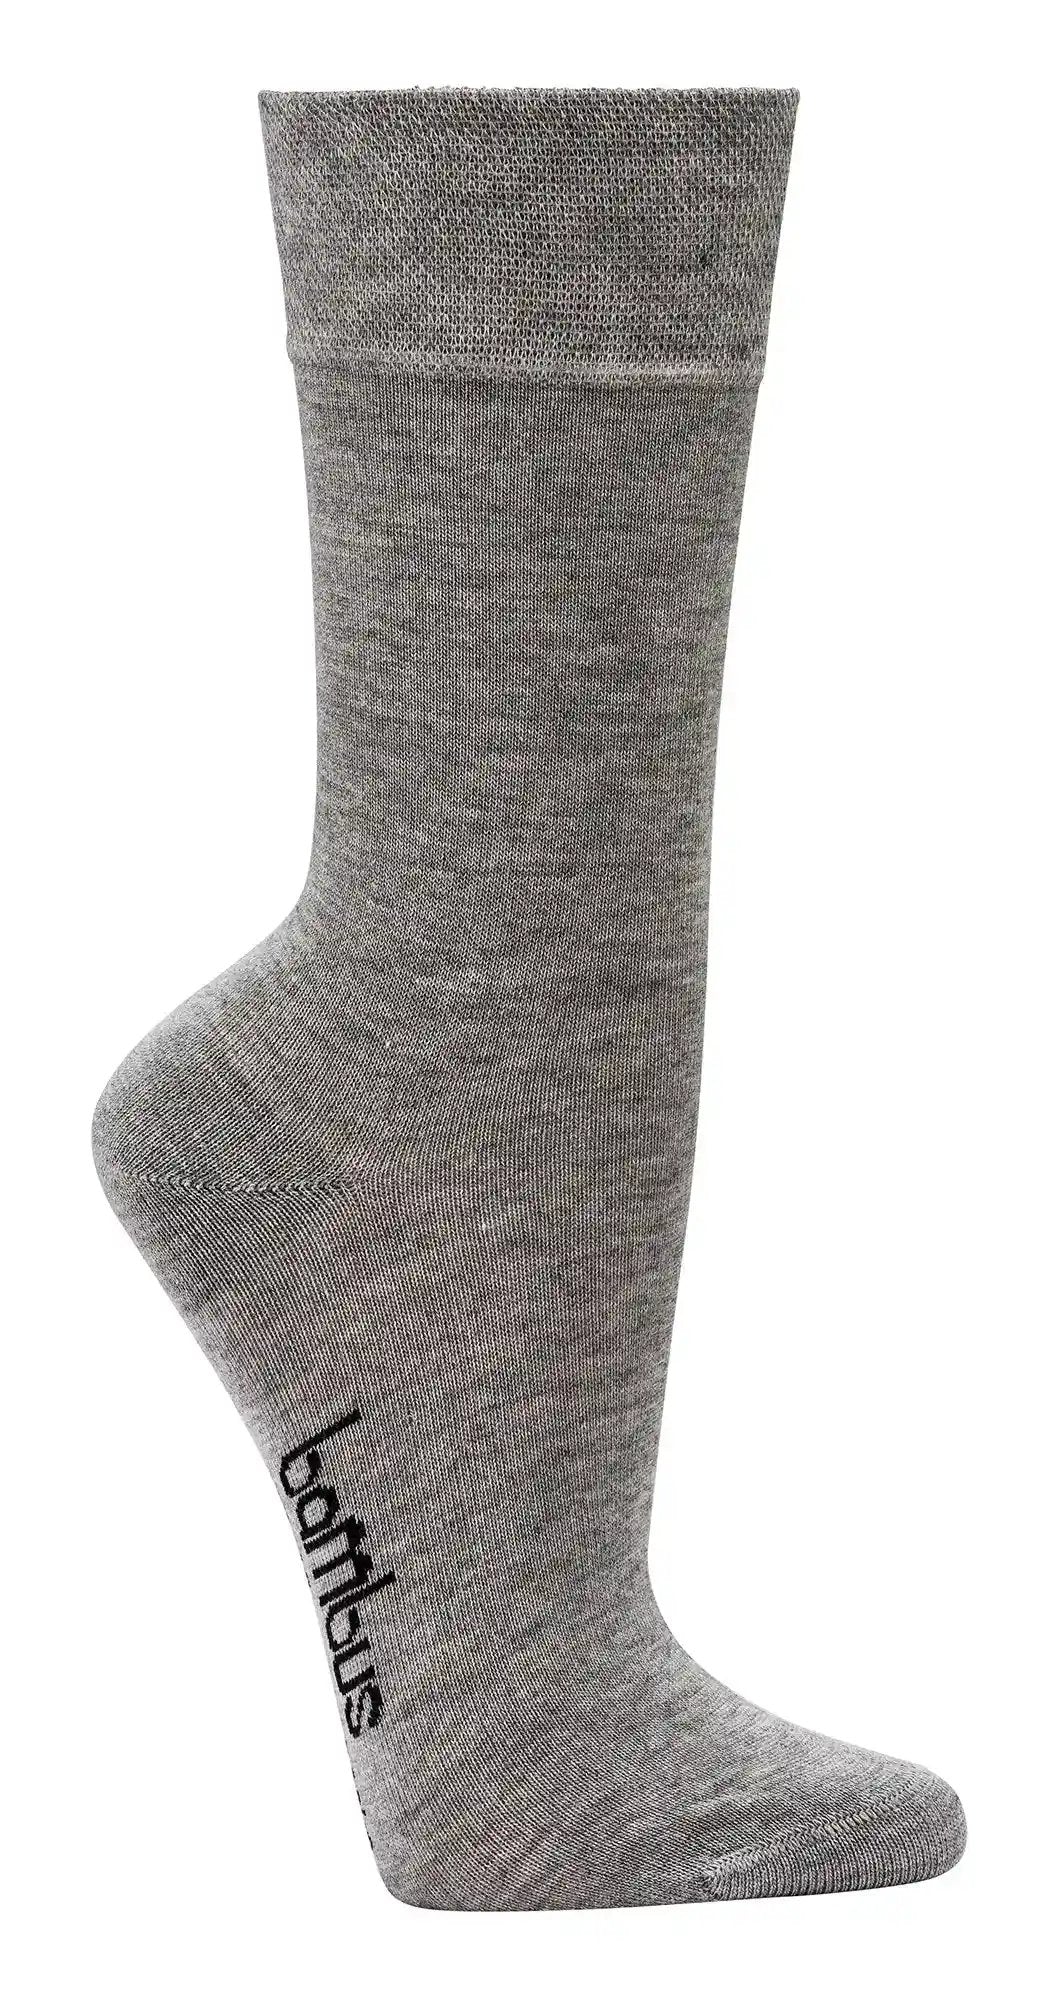 3-15 pairs of bamboo viscose socks melange soft edge without rubber for men and women